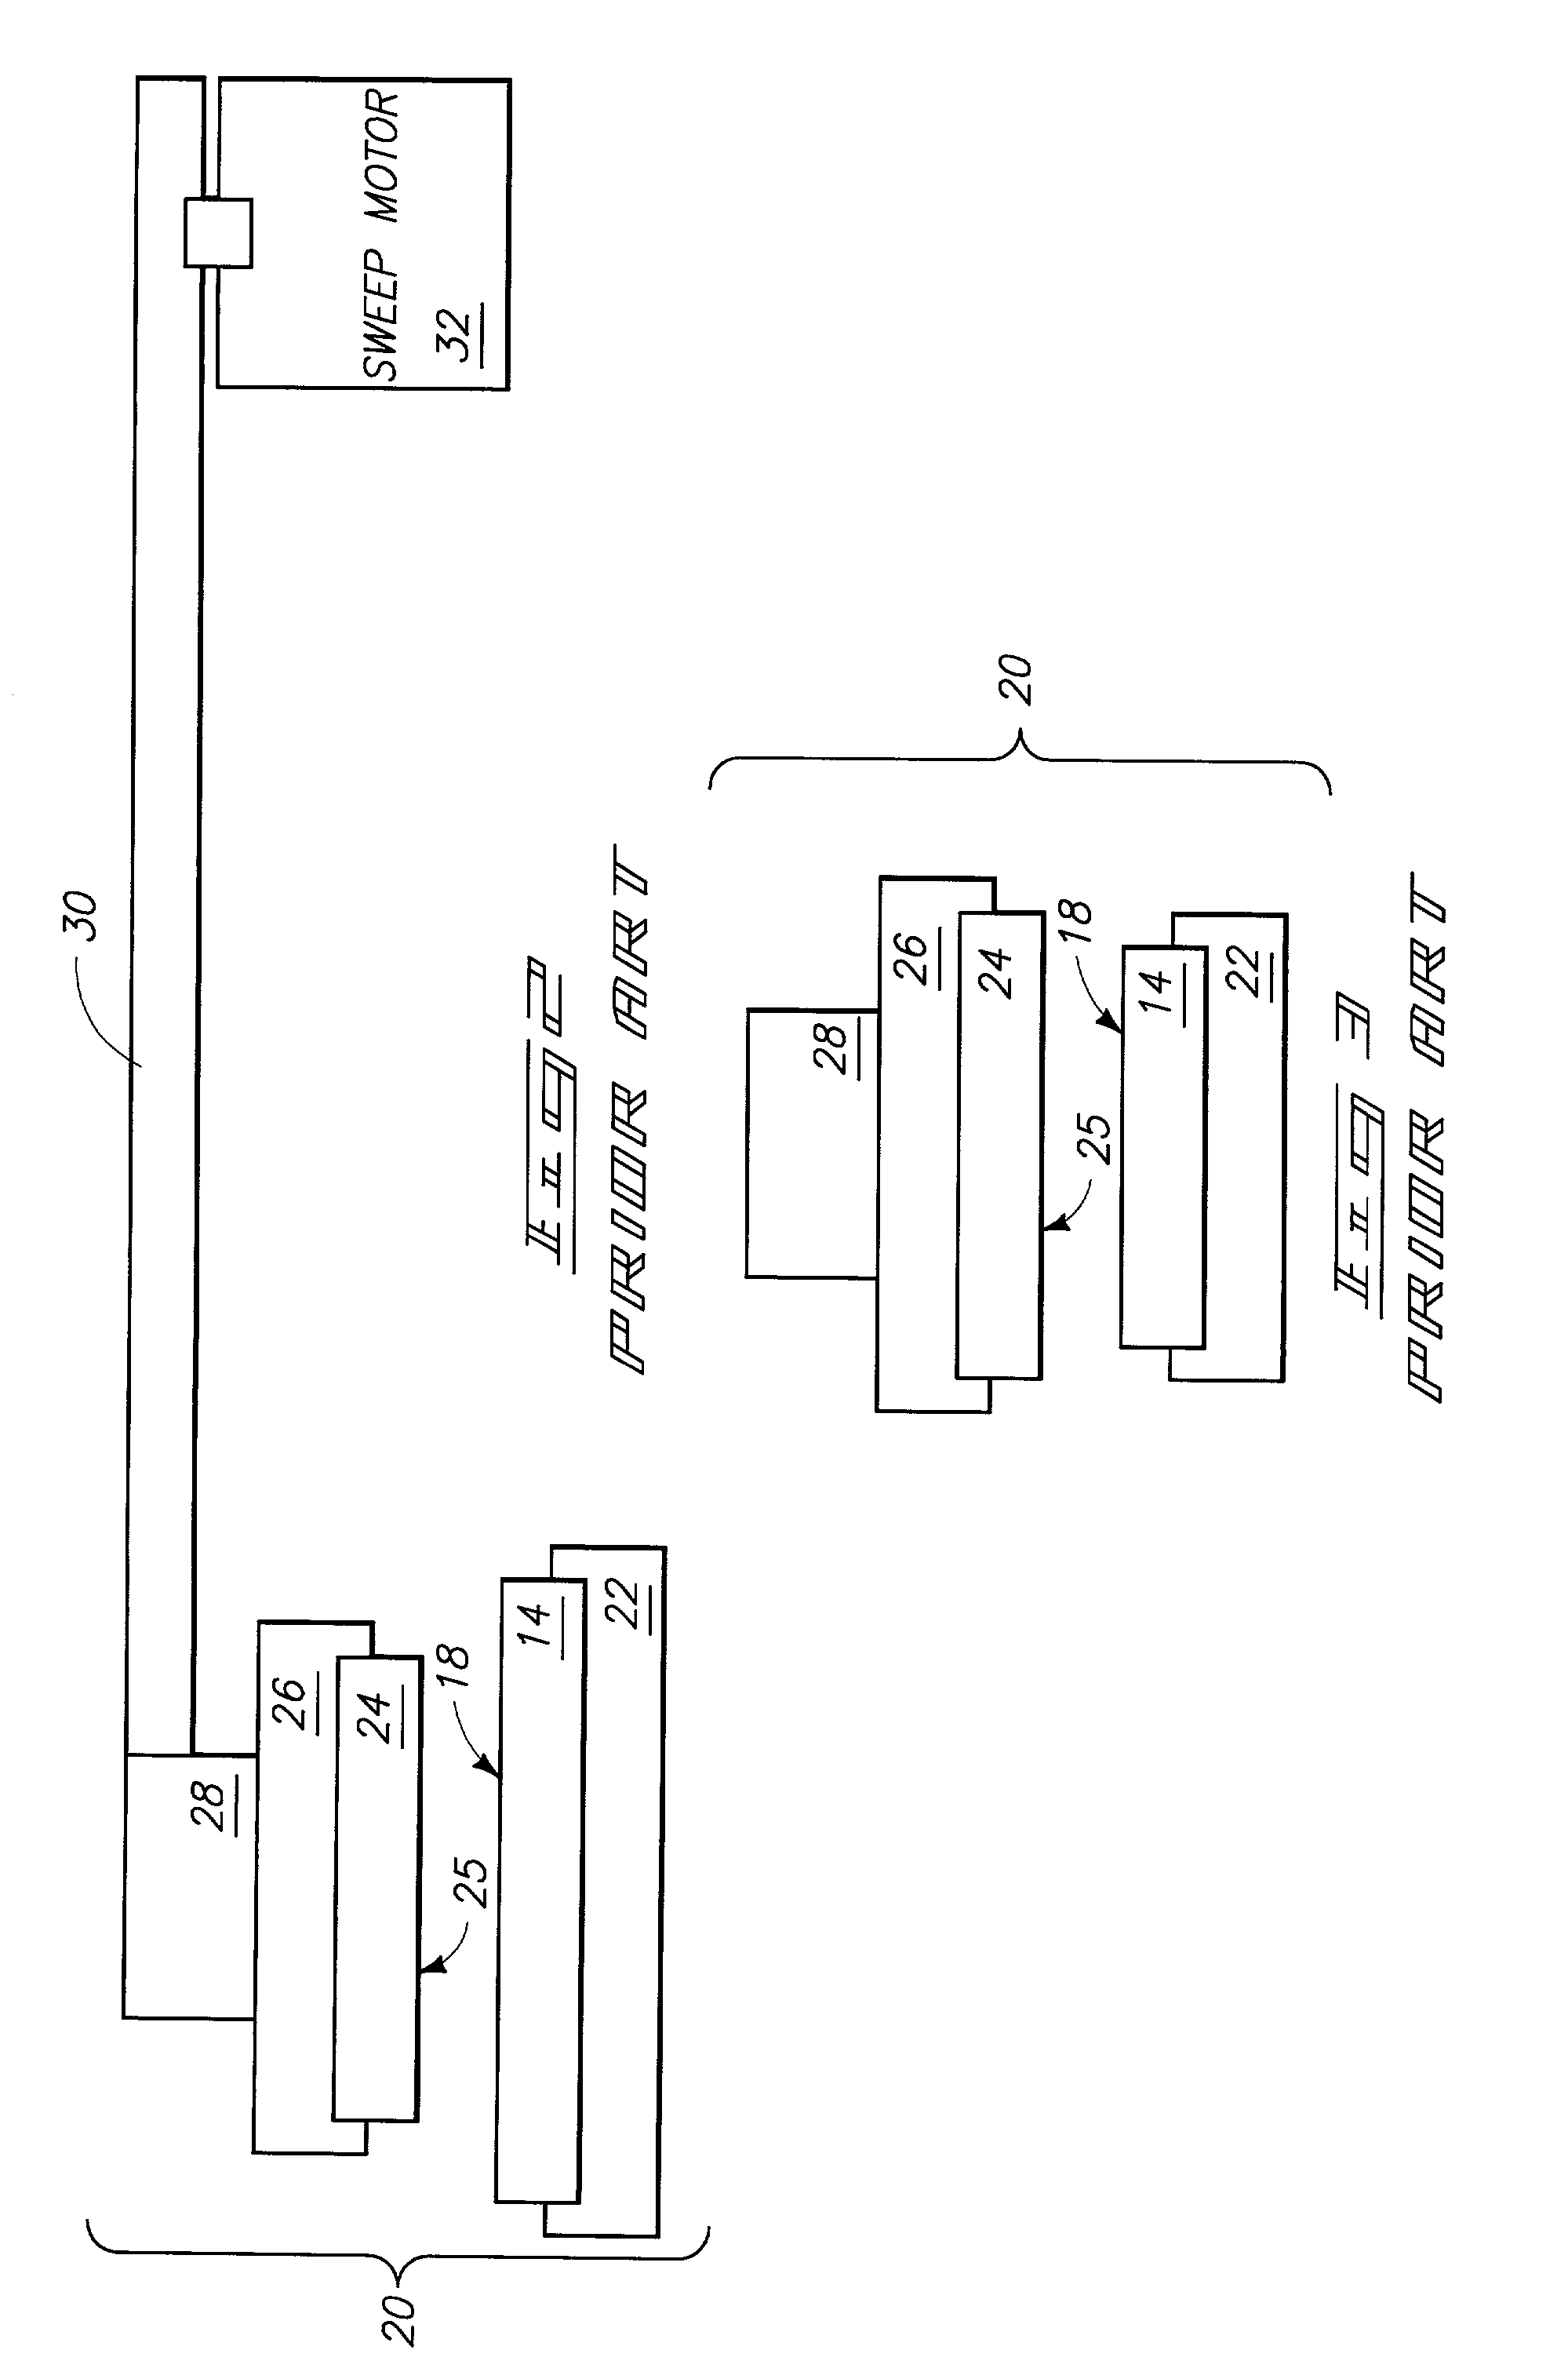 Methods for conditioning surfaces of polishing pads after chemical-mechanical polishing